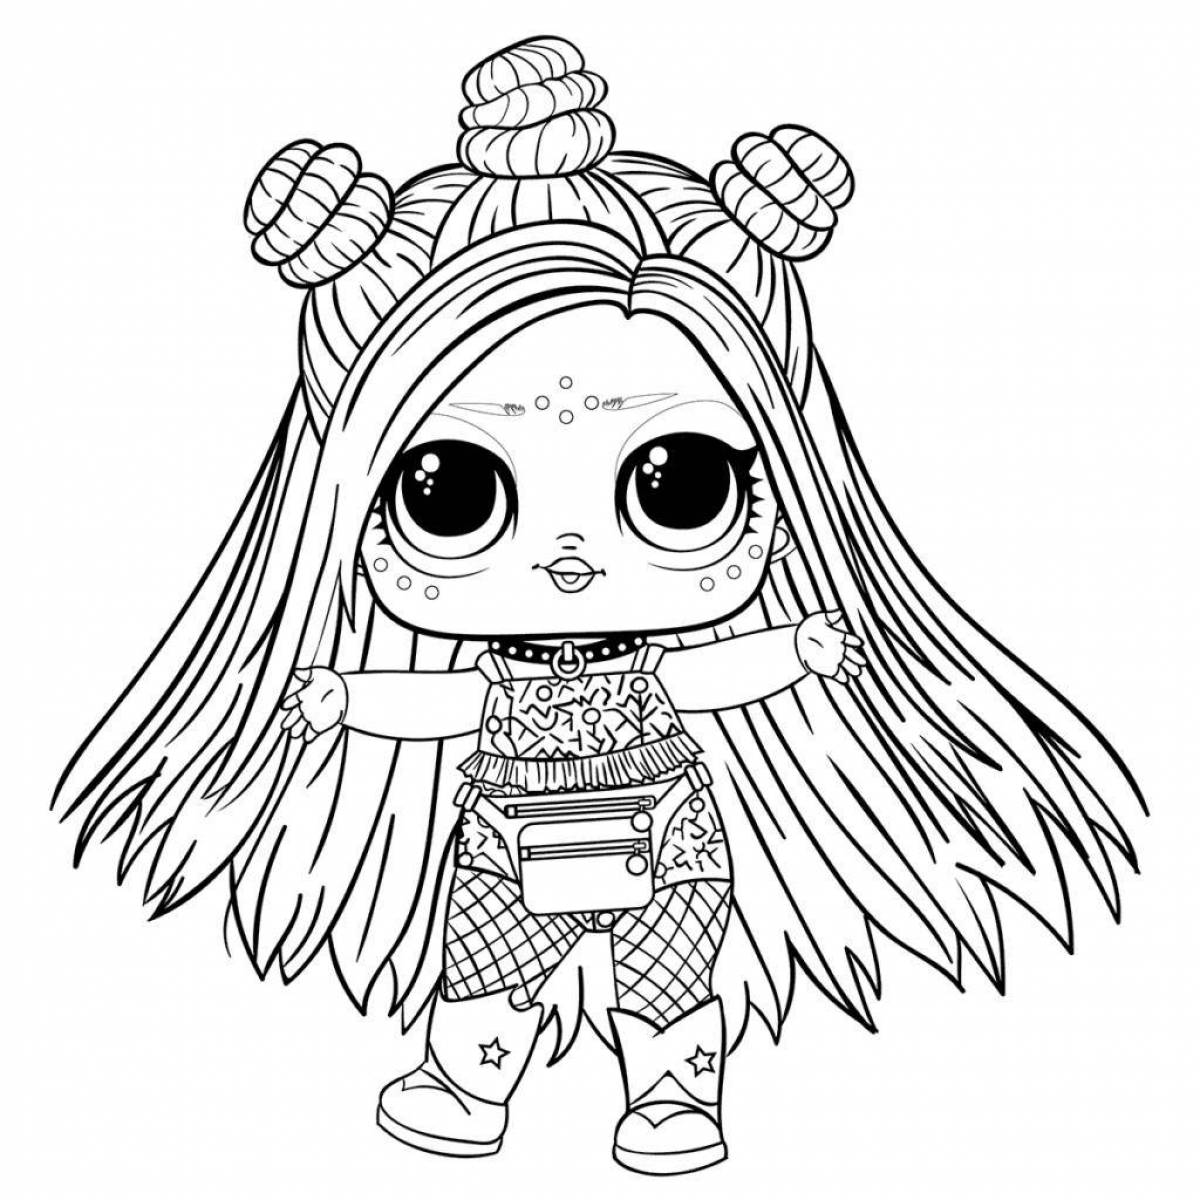 Colorful lola doll coloring page for kids